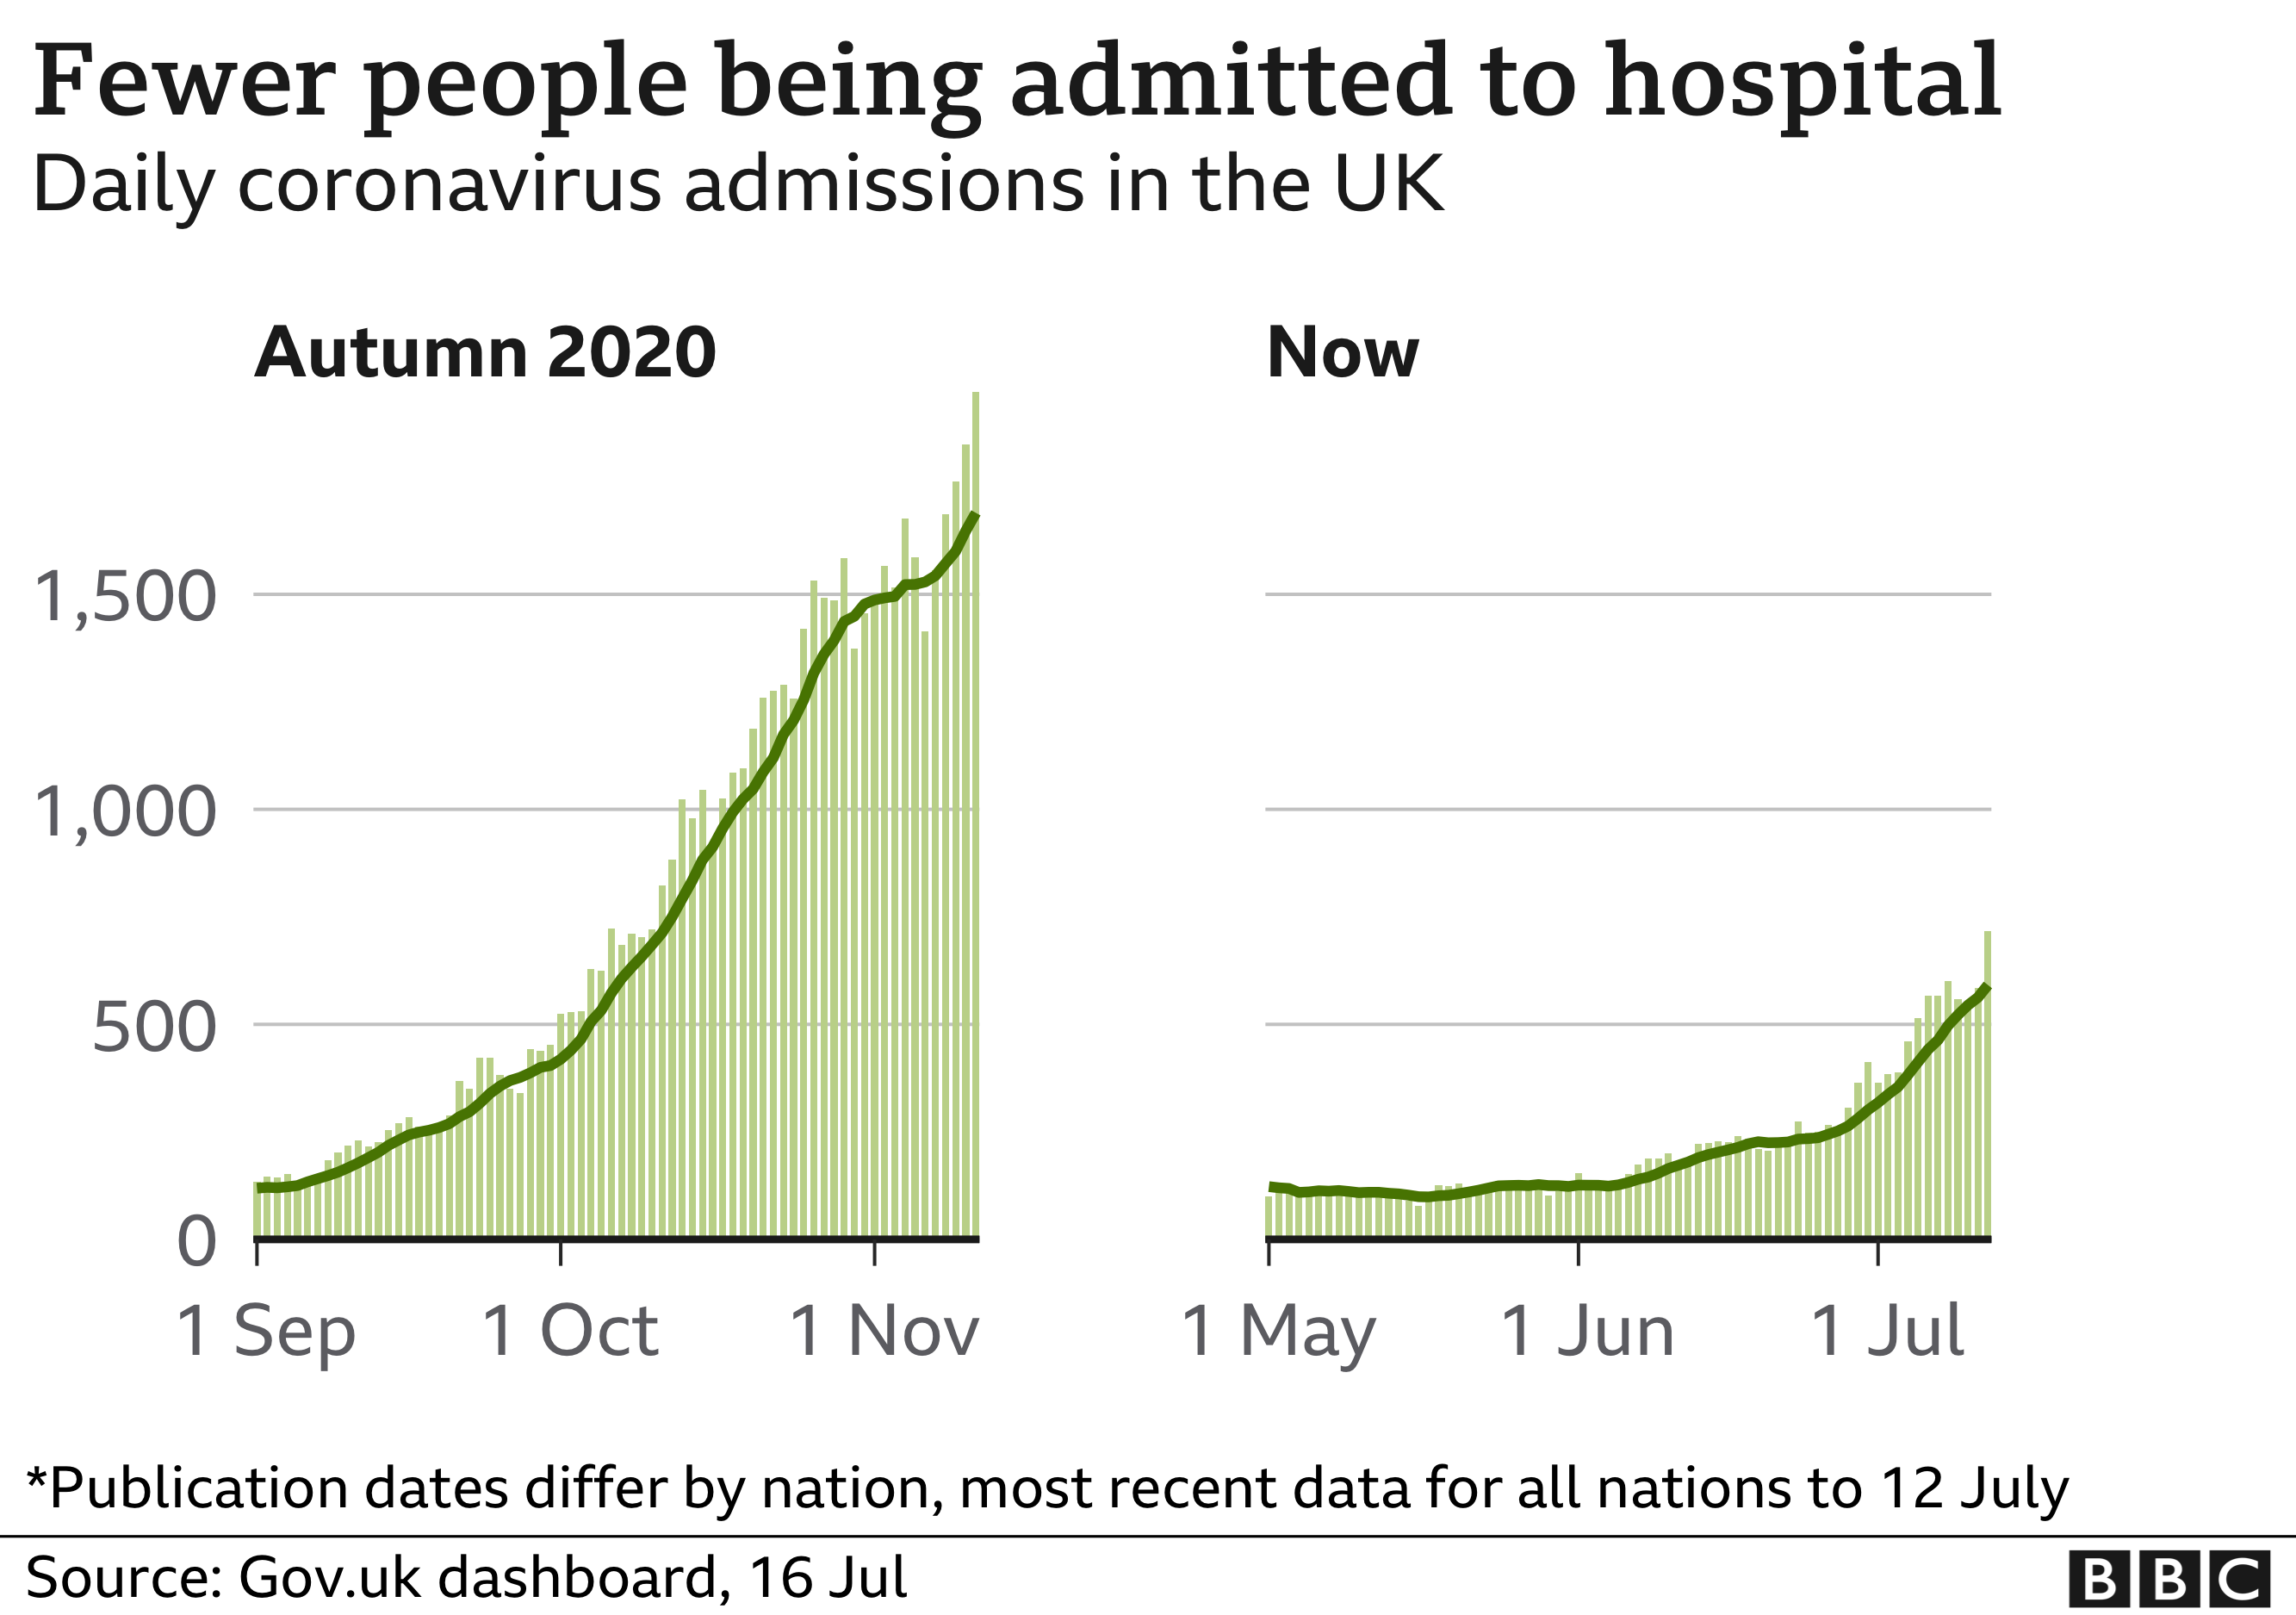 Chart showing that the number of hospitalisations are much lower now than compared to last autumn